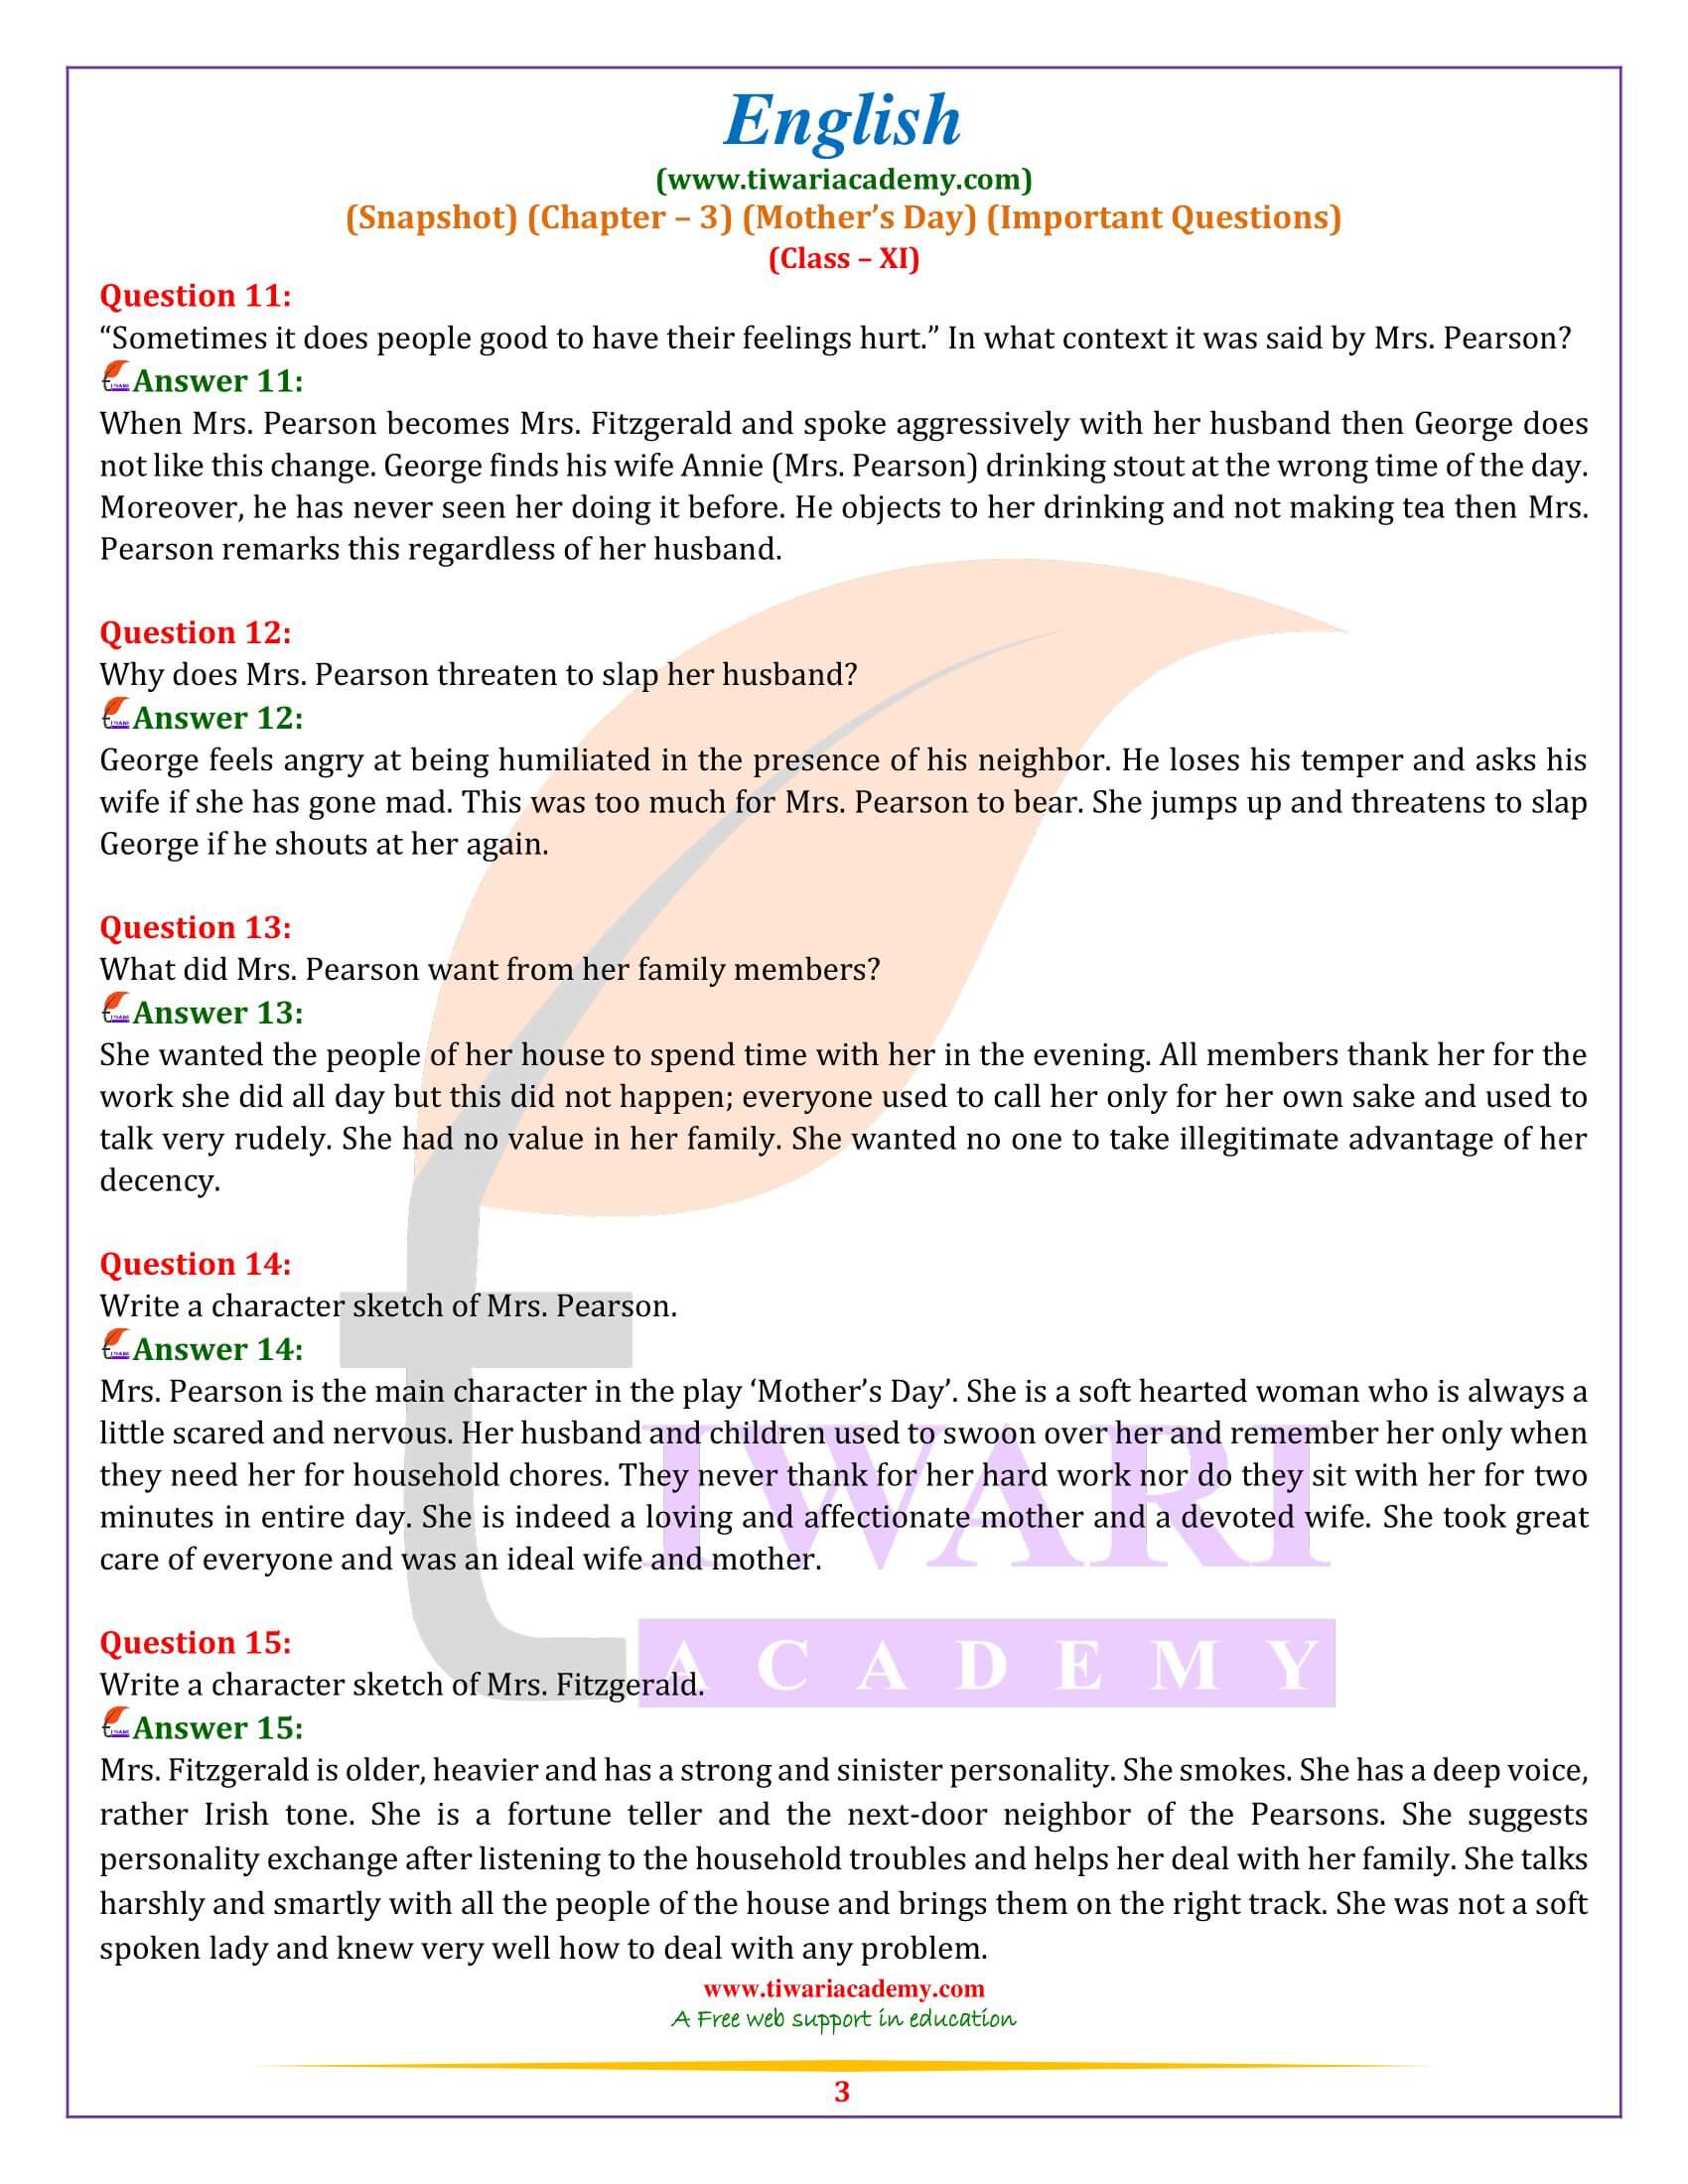 Class 11 English Snapshots Chapter 3 Revision Questions